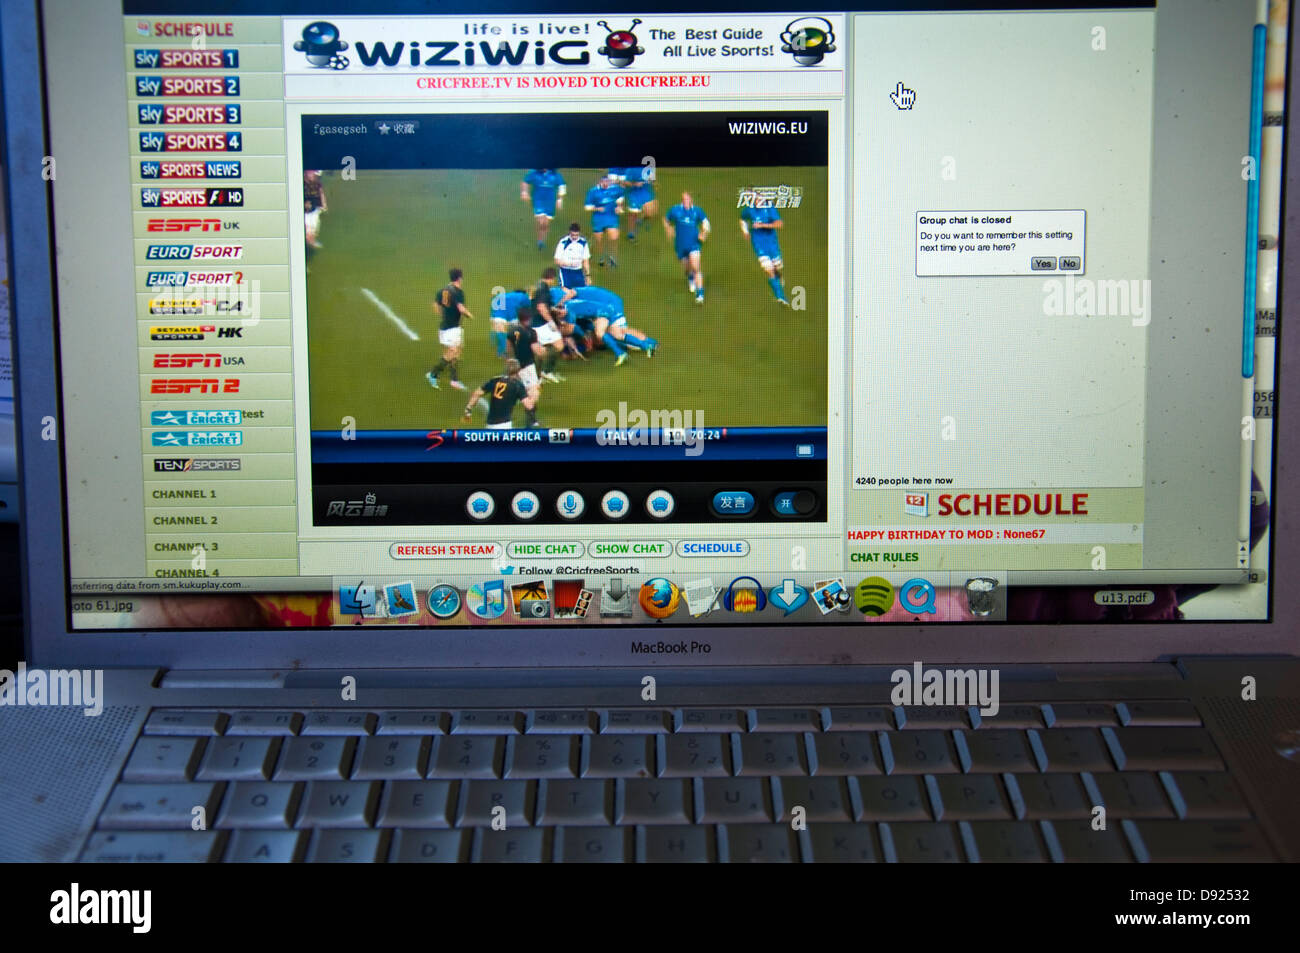 Wiziwig computer tv streaming sports site Stock Photo